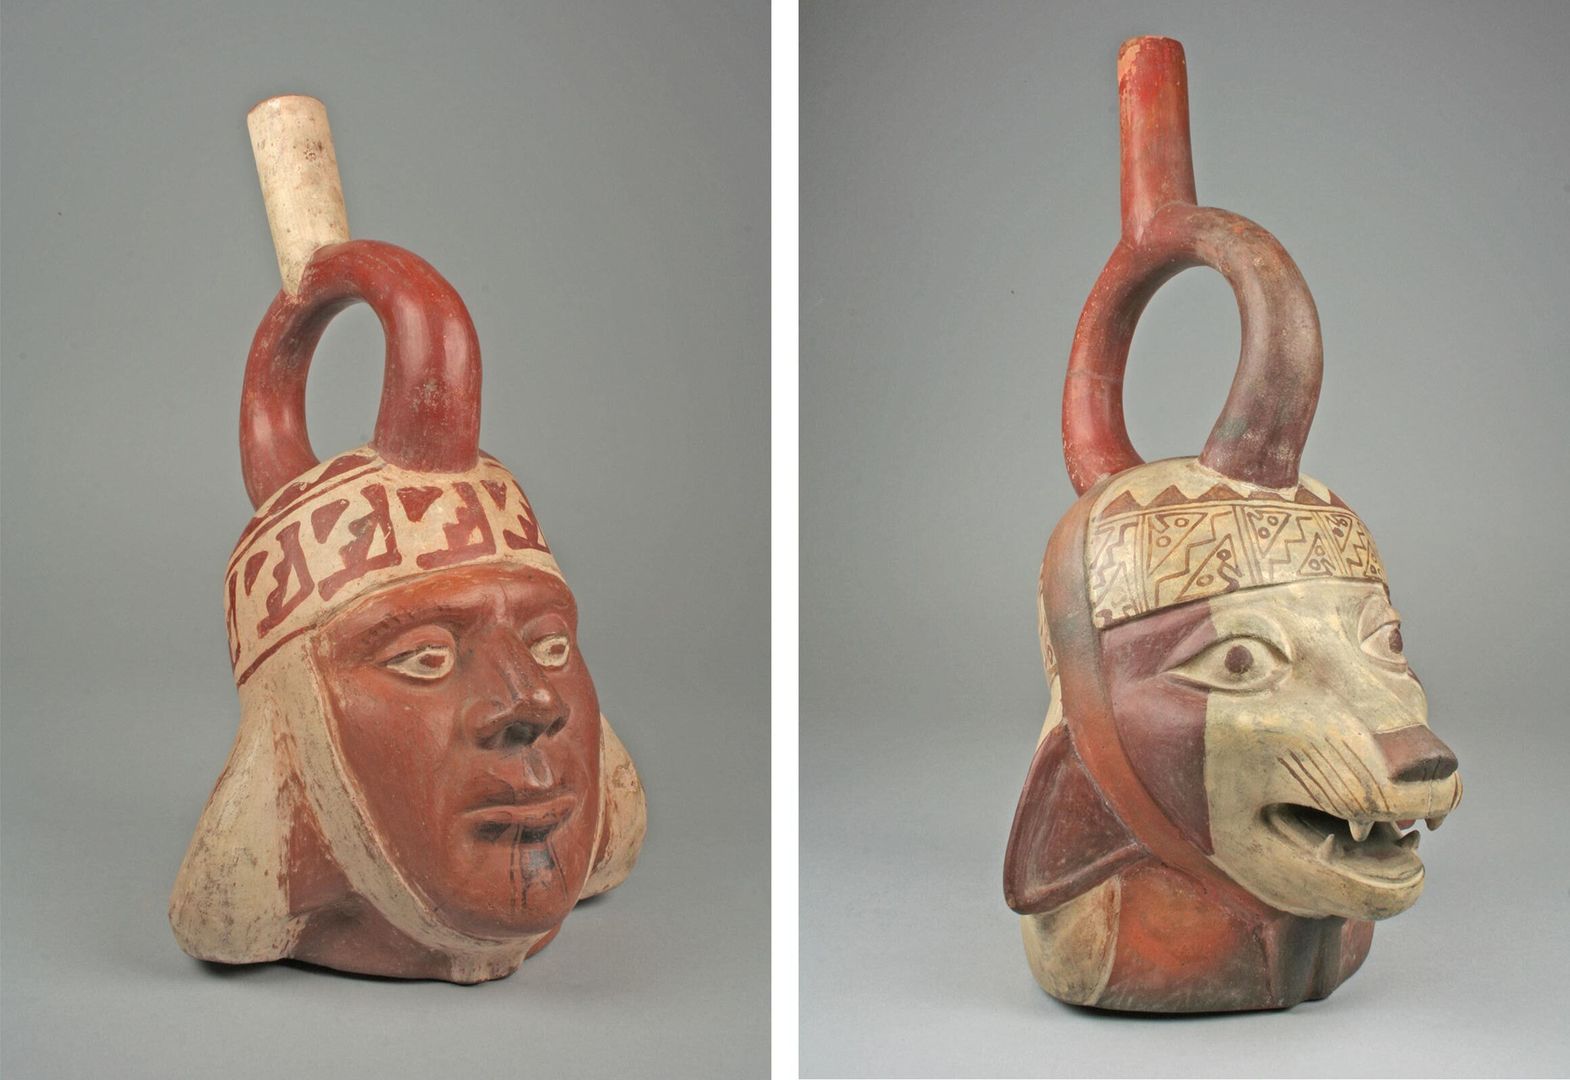 Two vessels in the shape of heads, one human and one animal